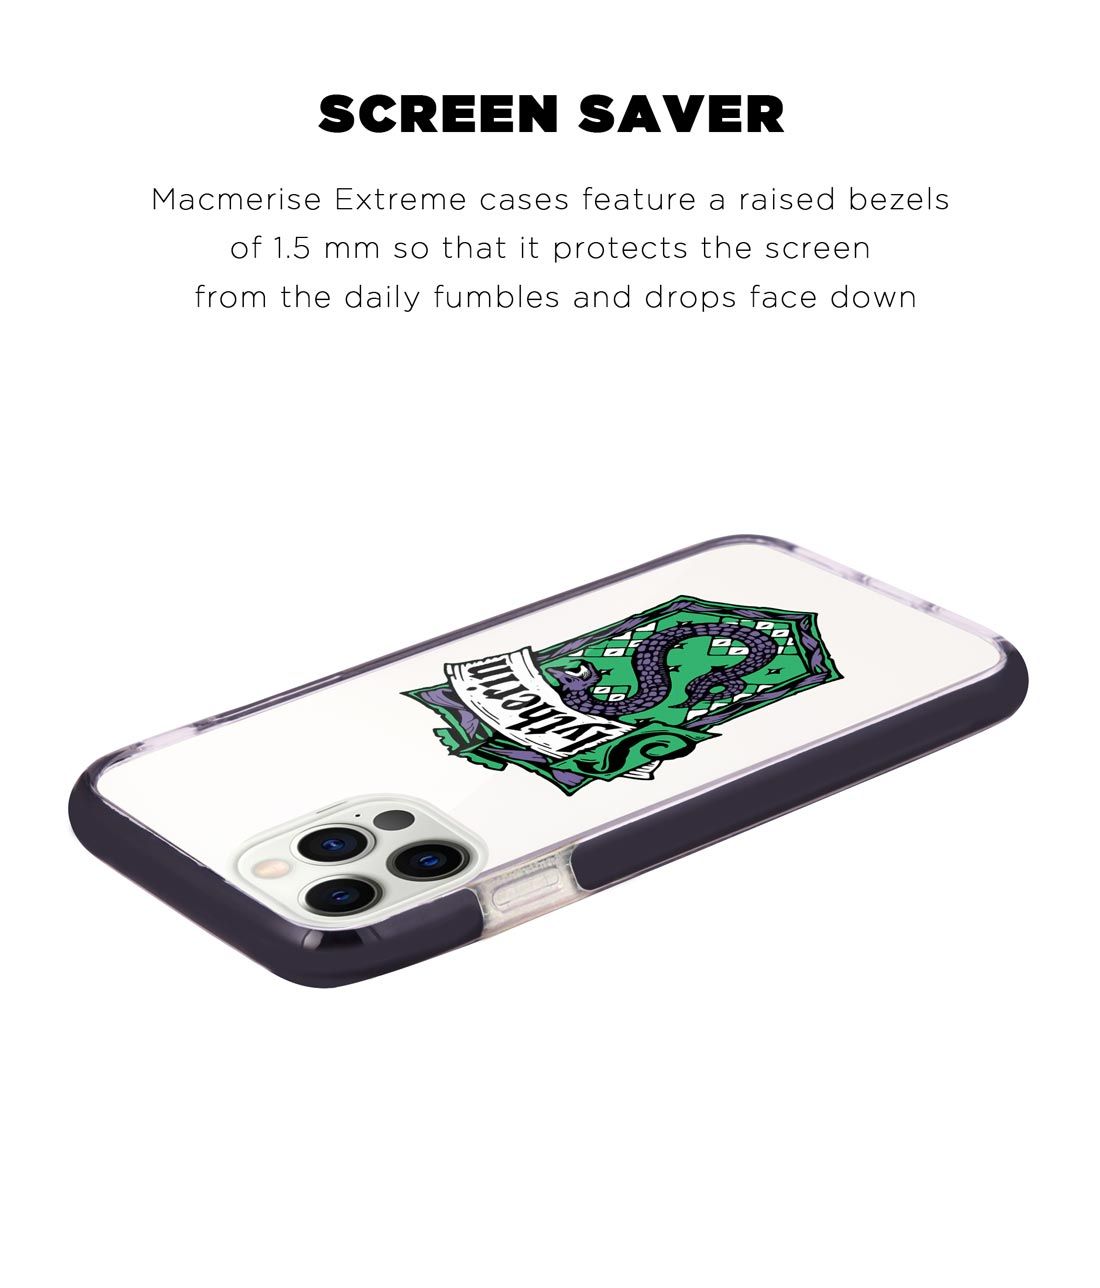 Crest Slytherin - Extreme Case for iPhone 12 Pro Max